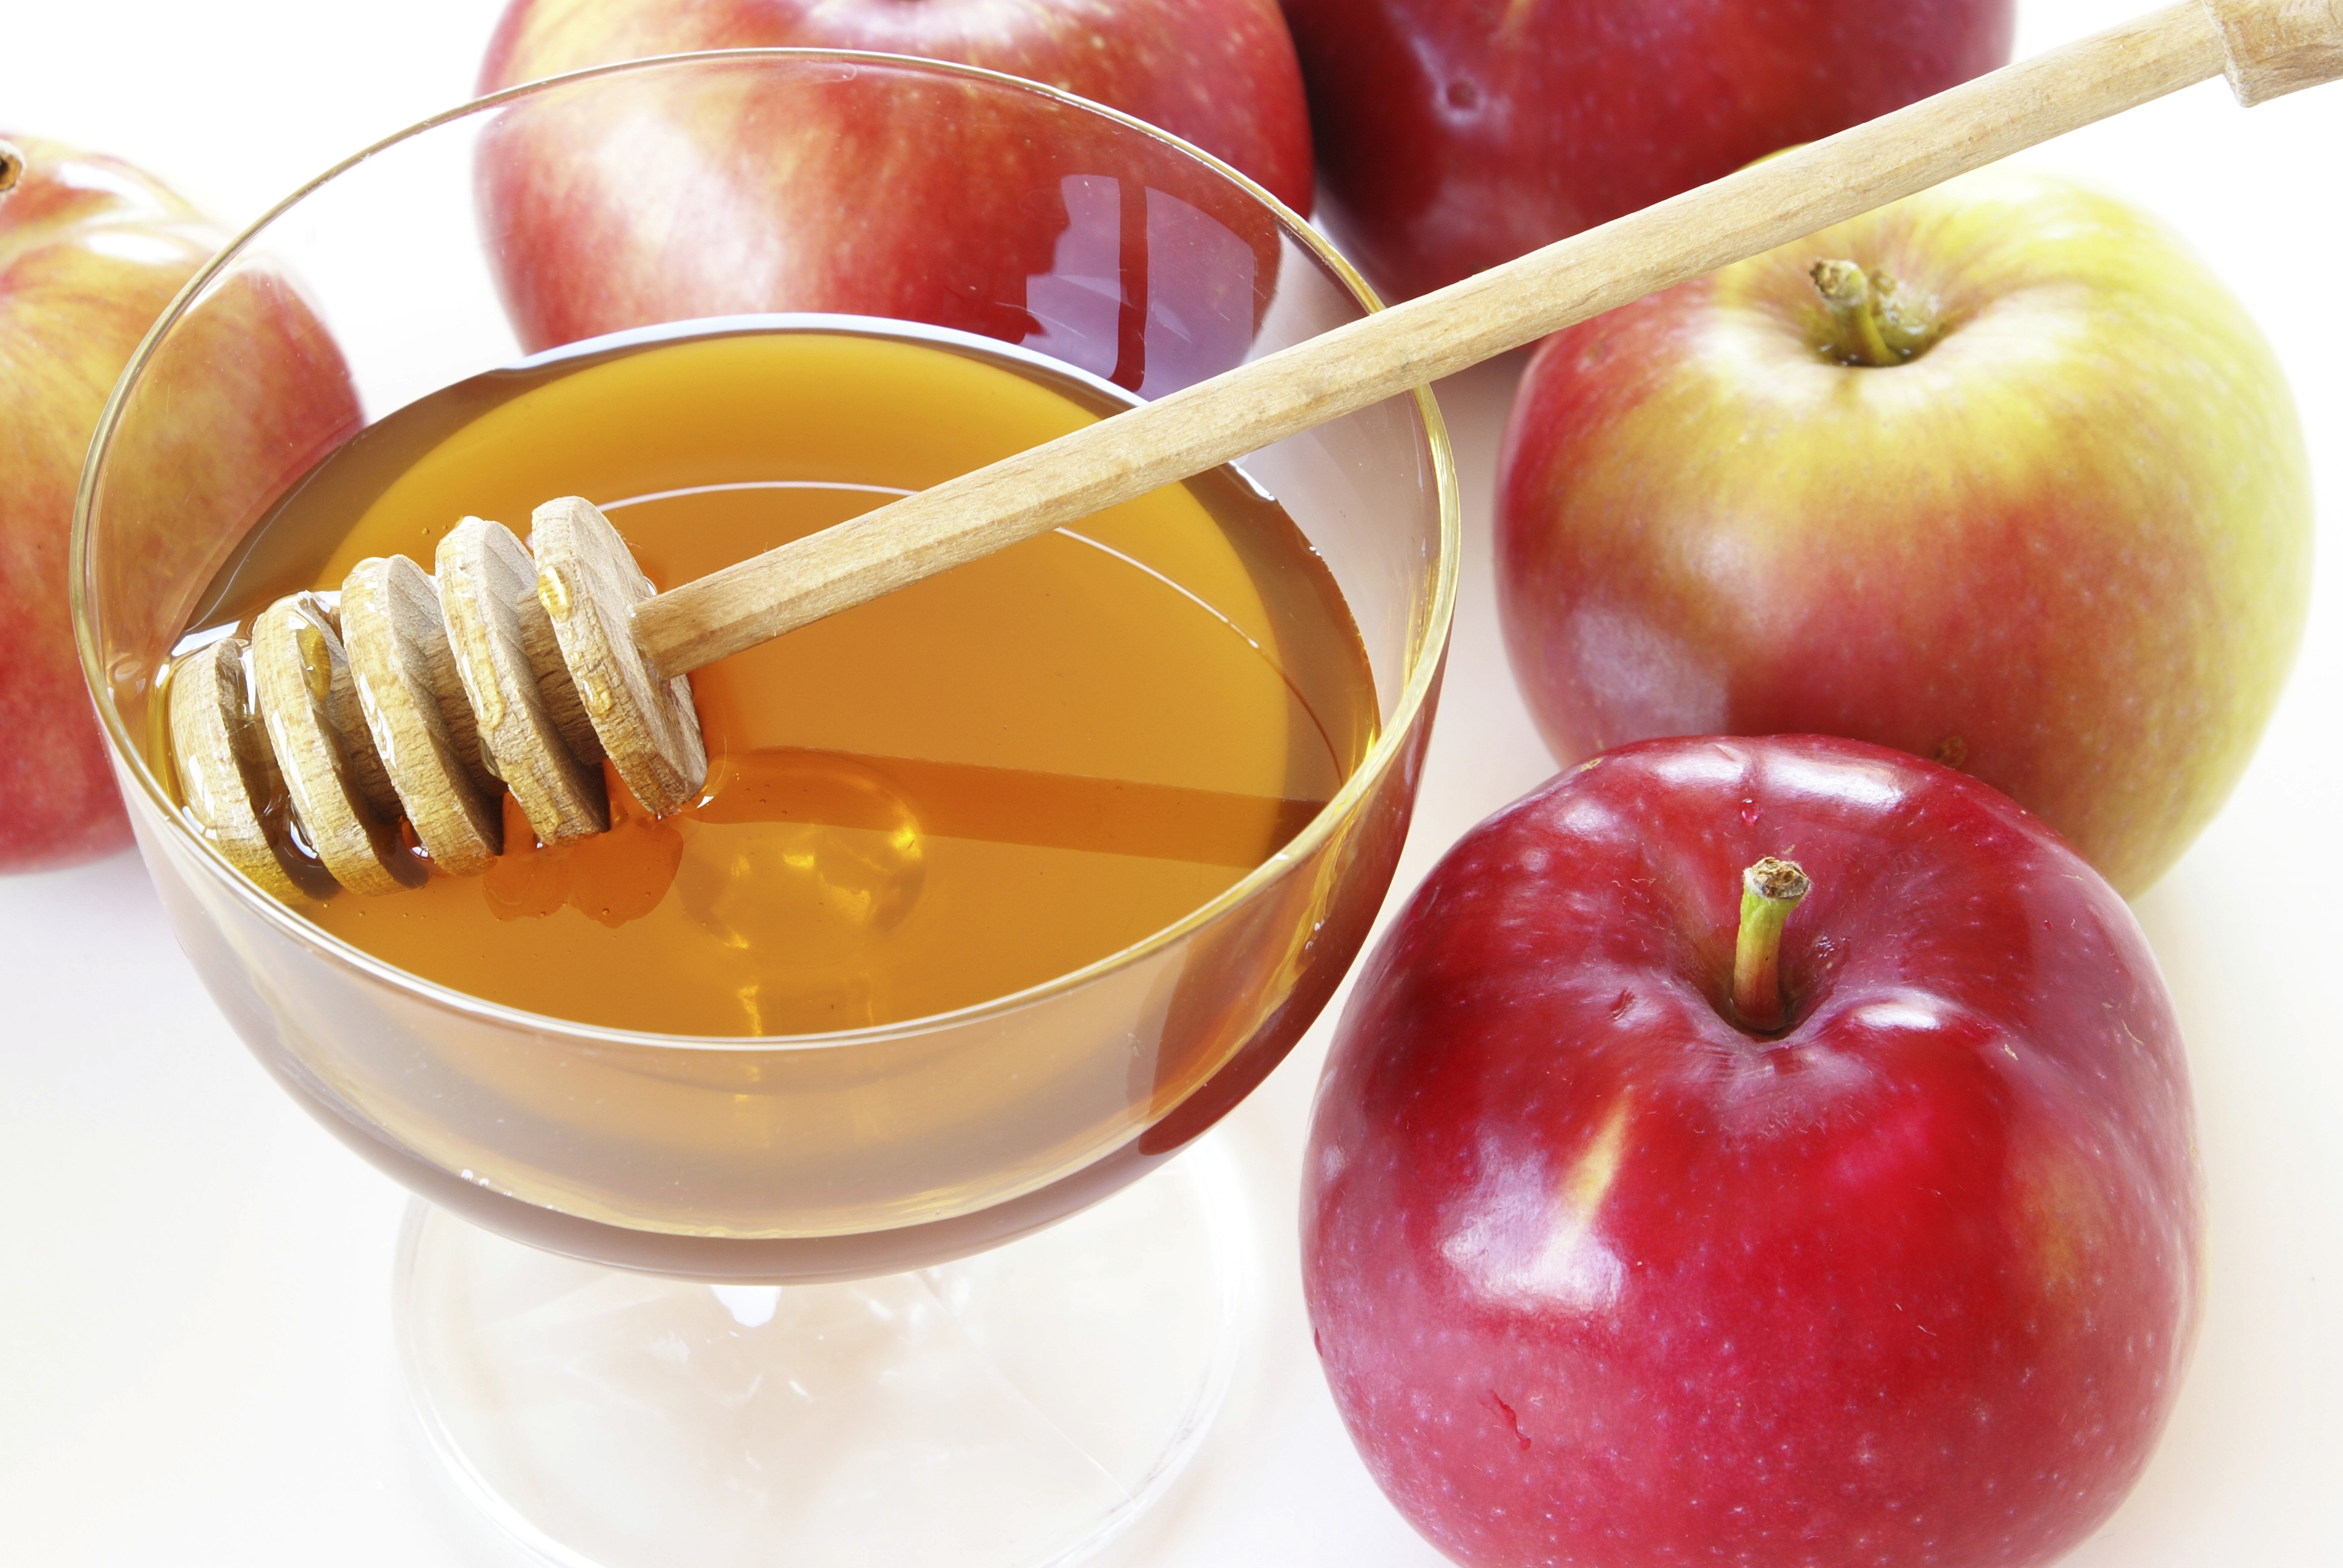 Whole apples and bowl of honey